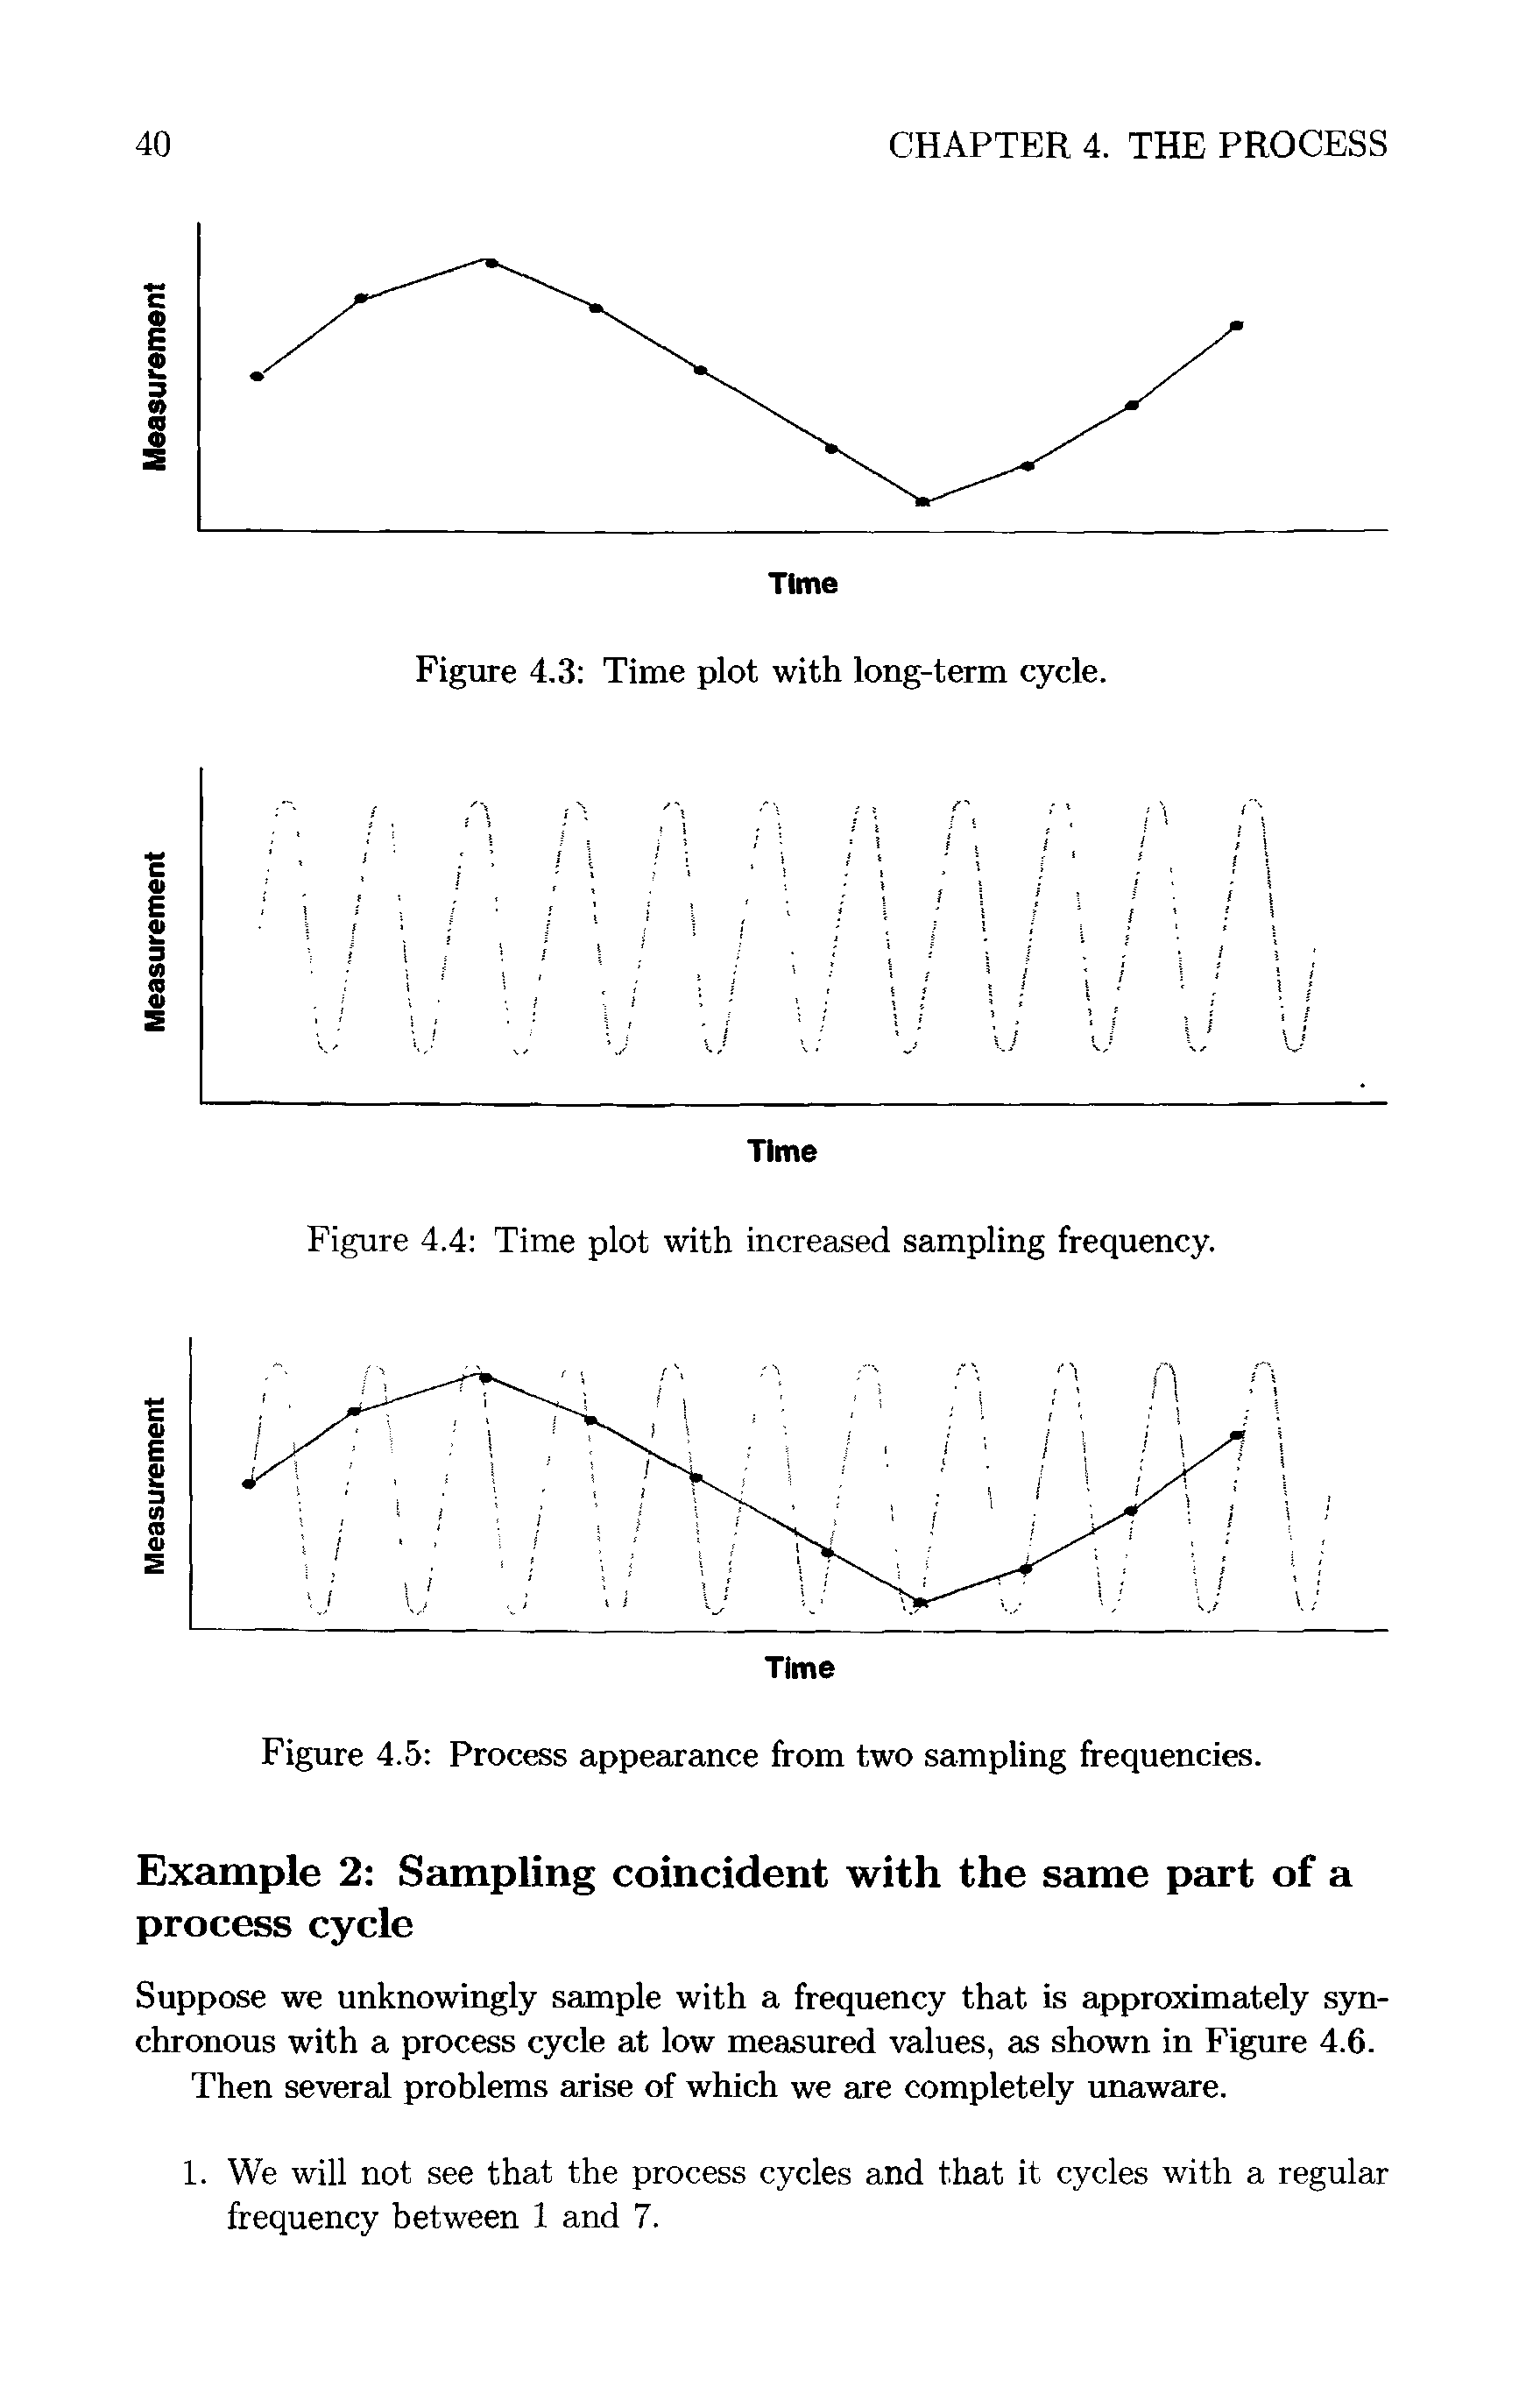 Figure 4,3 Time plot with long-term cycle.